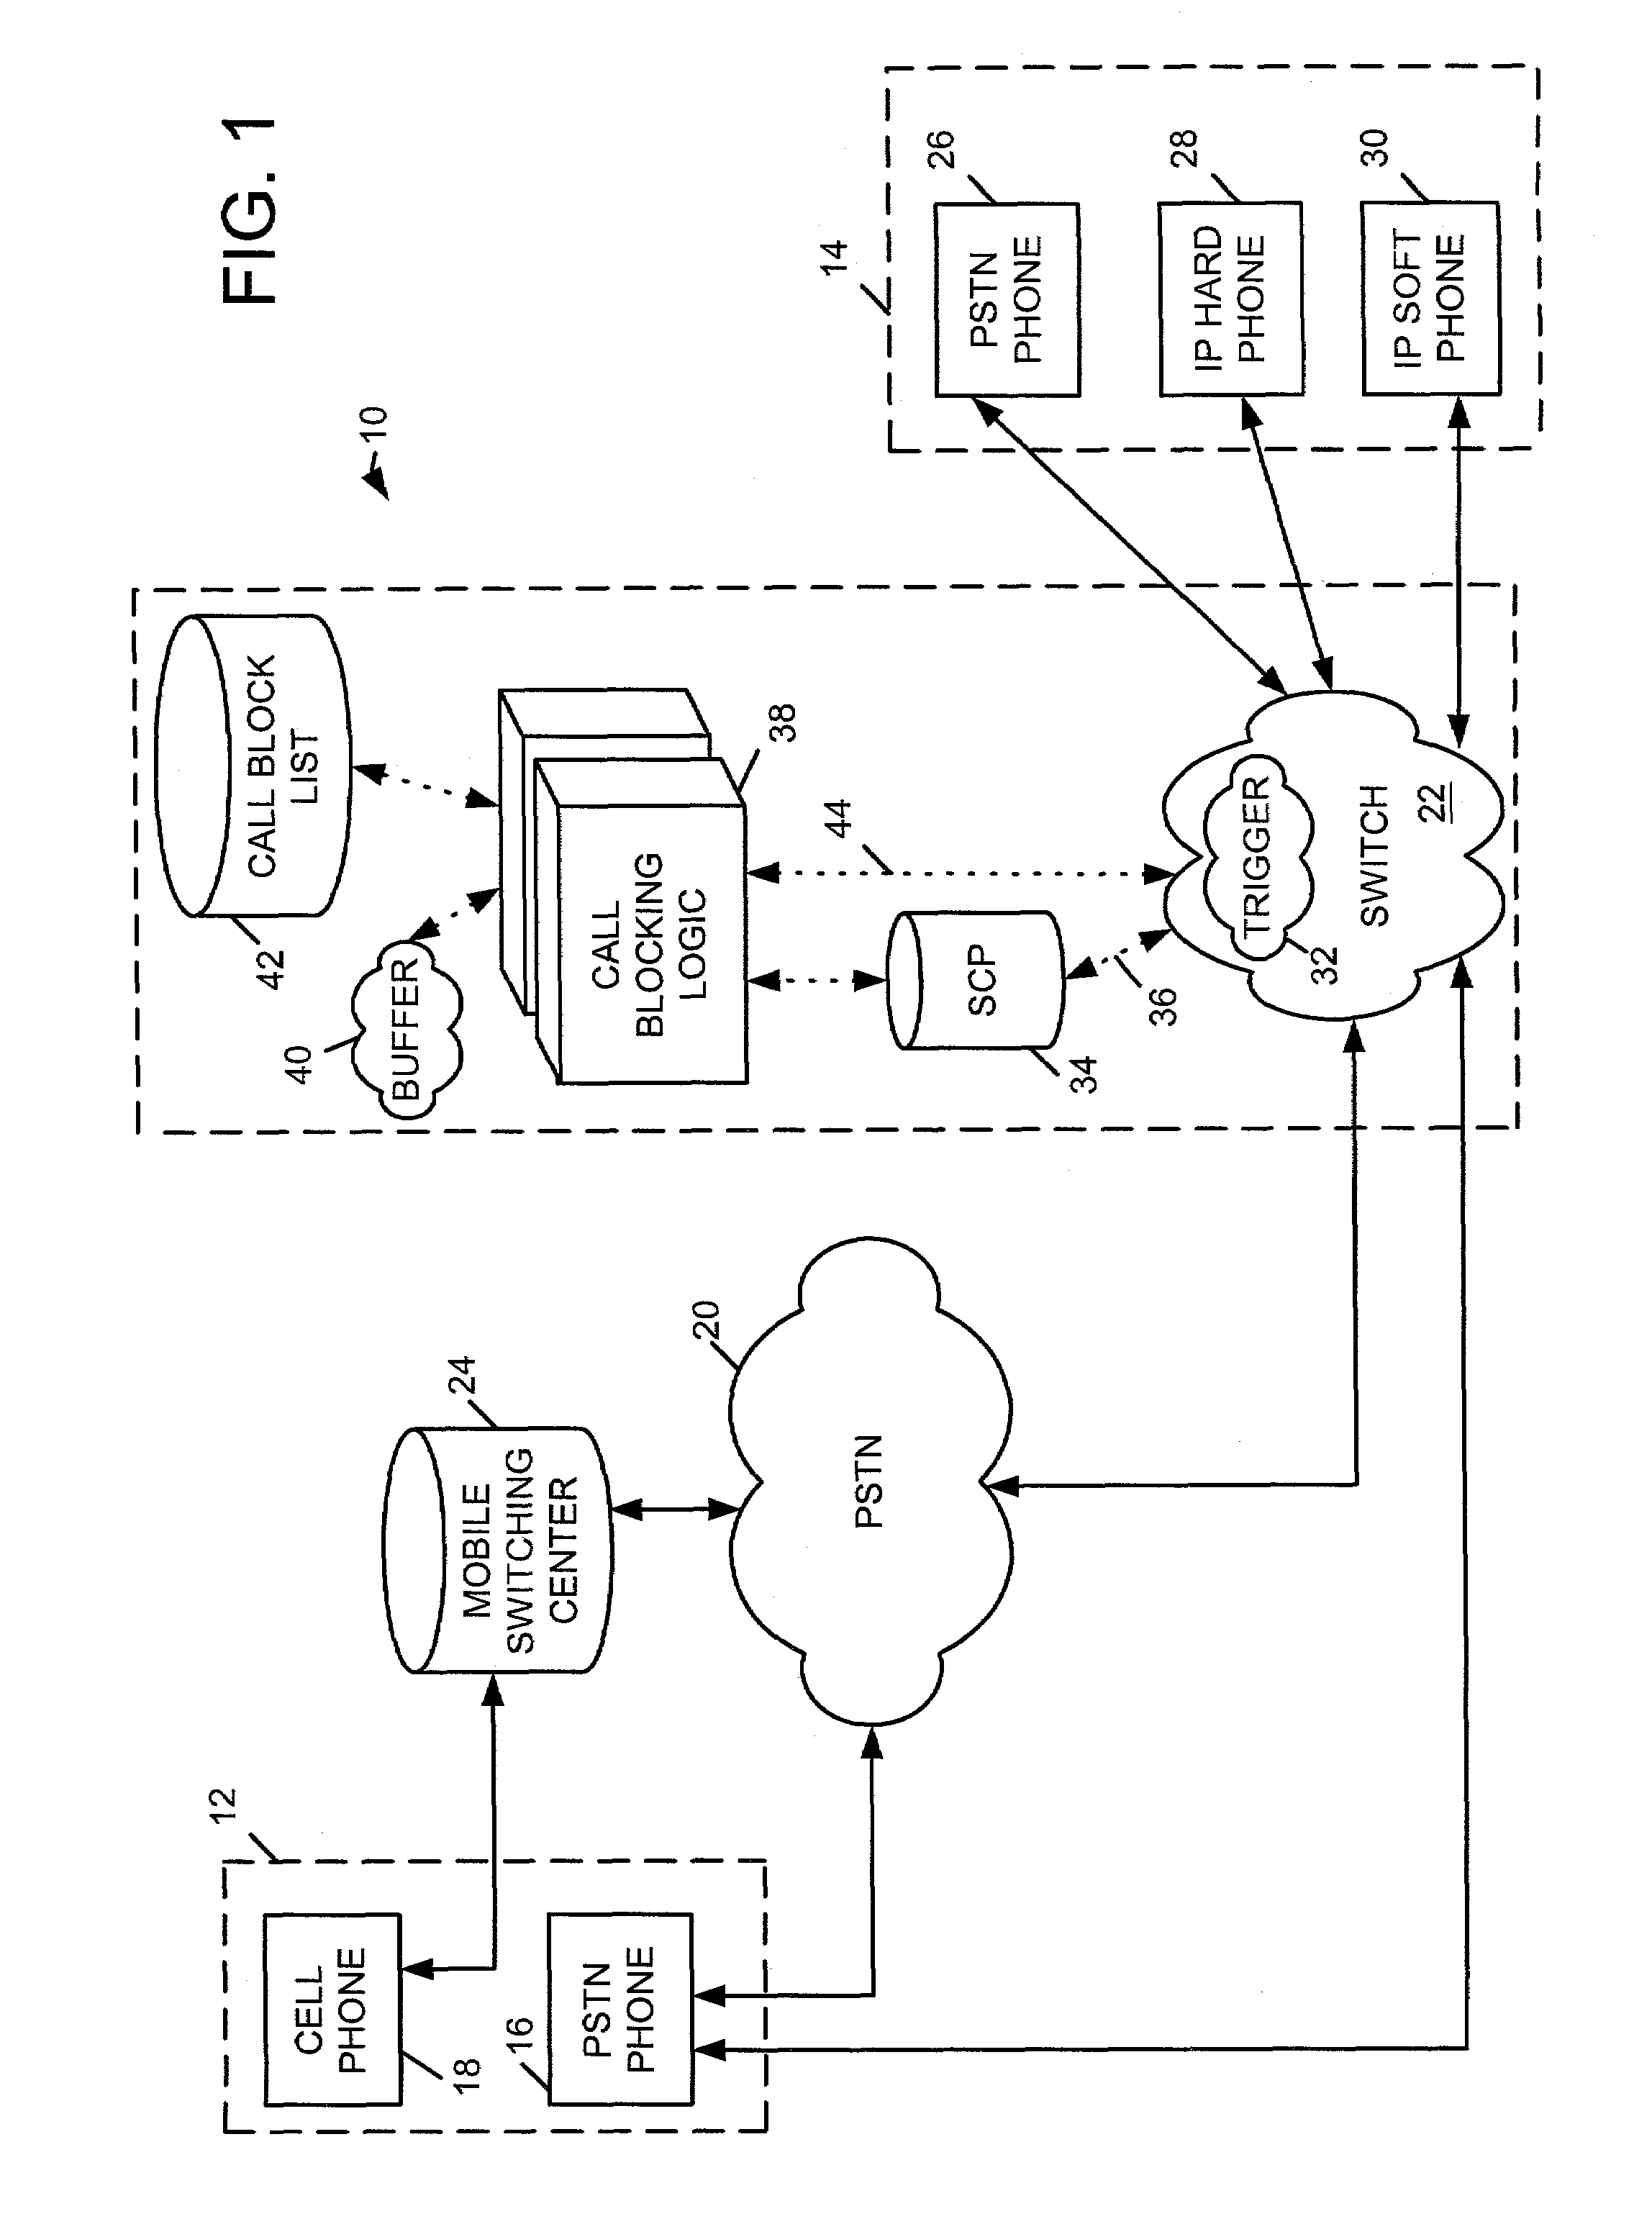 System and method for real-time blocking of a telephone call